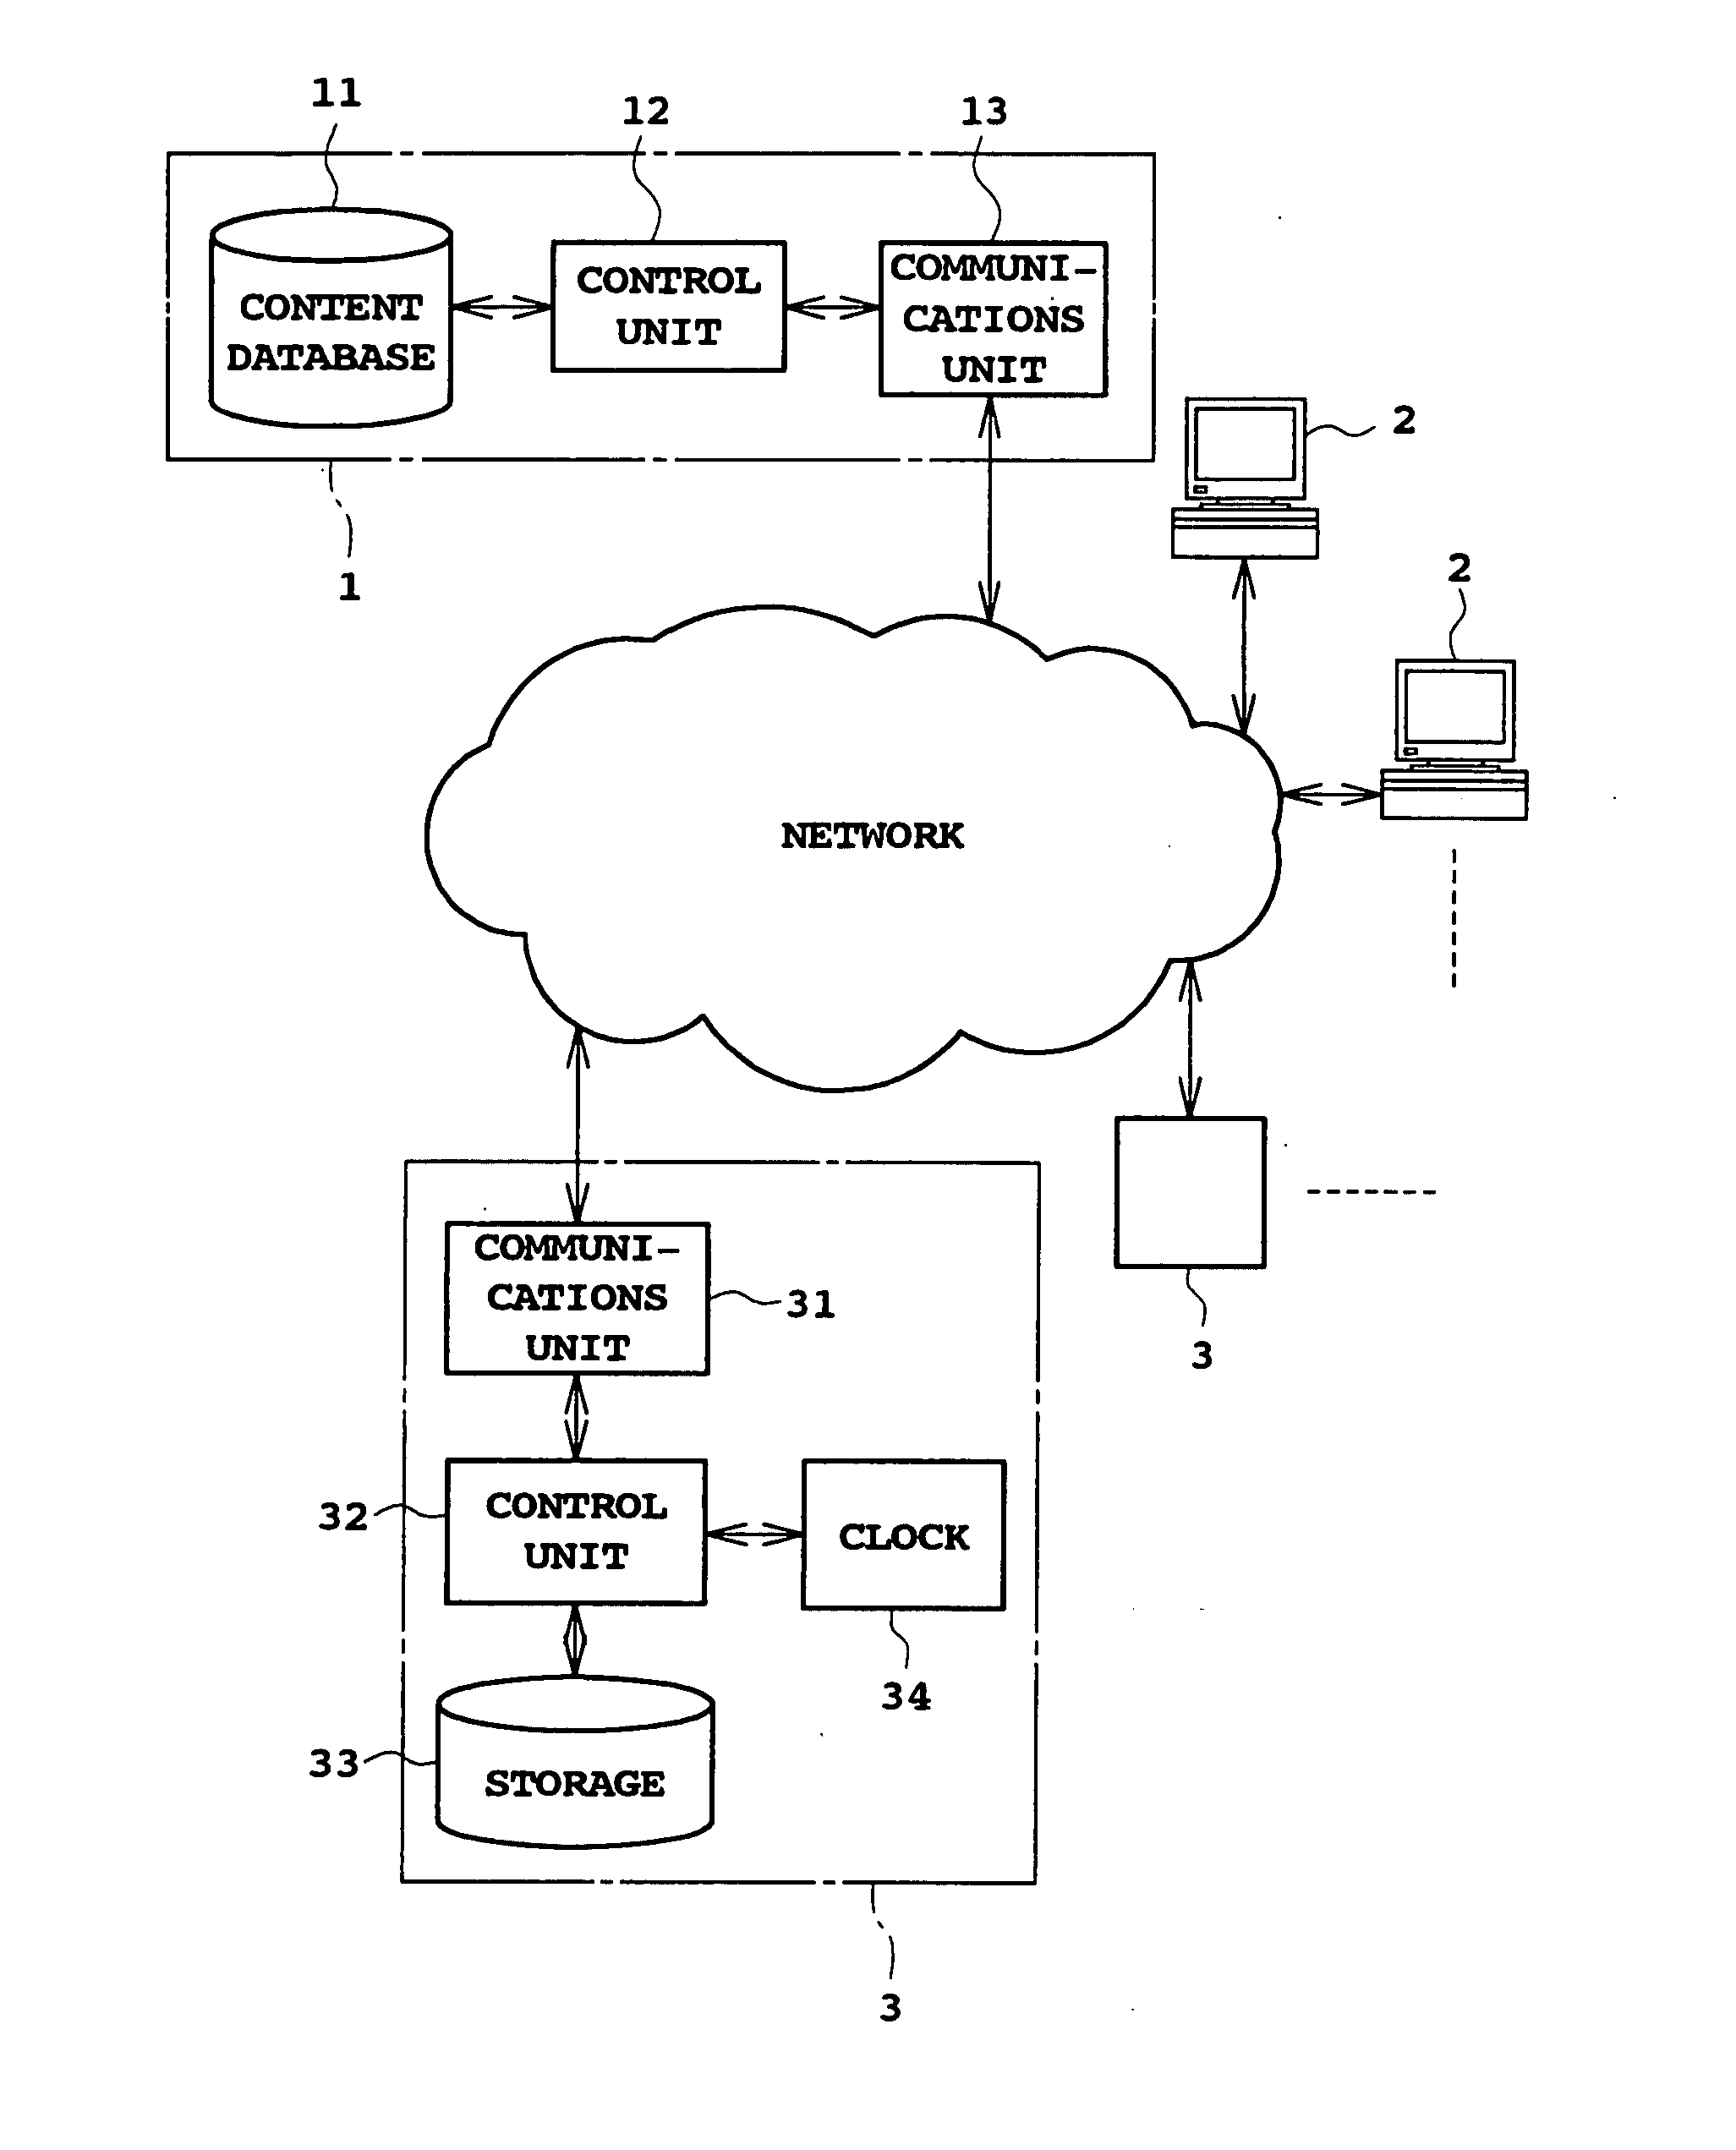 Content/information search system